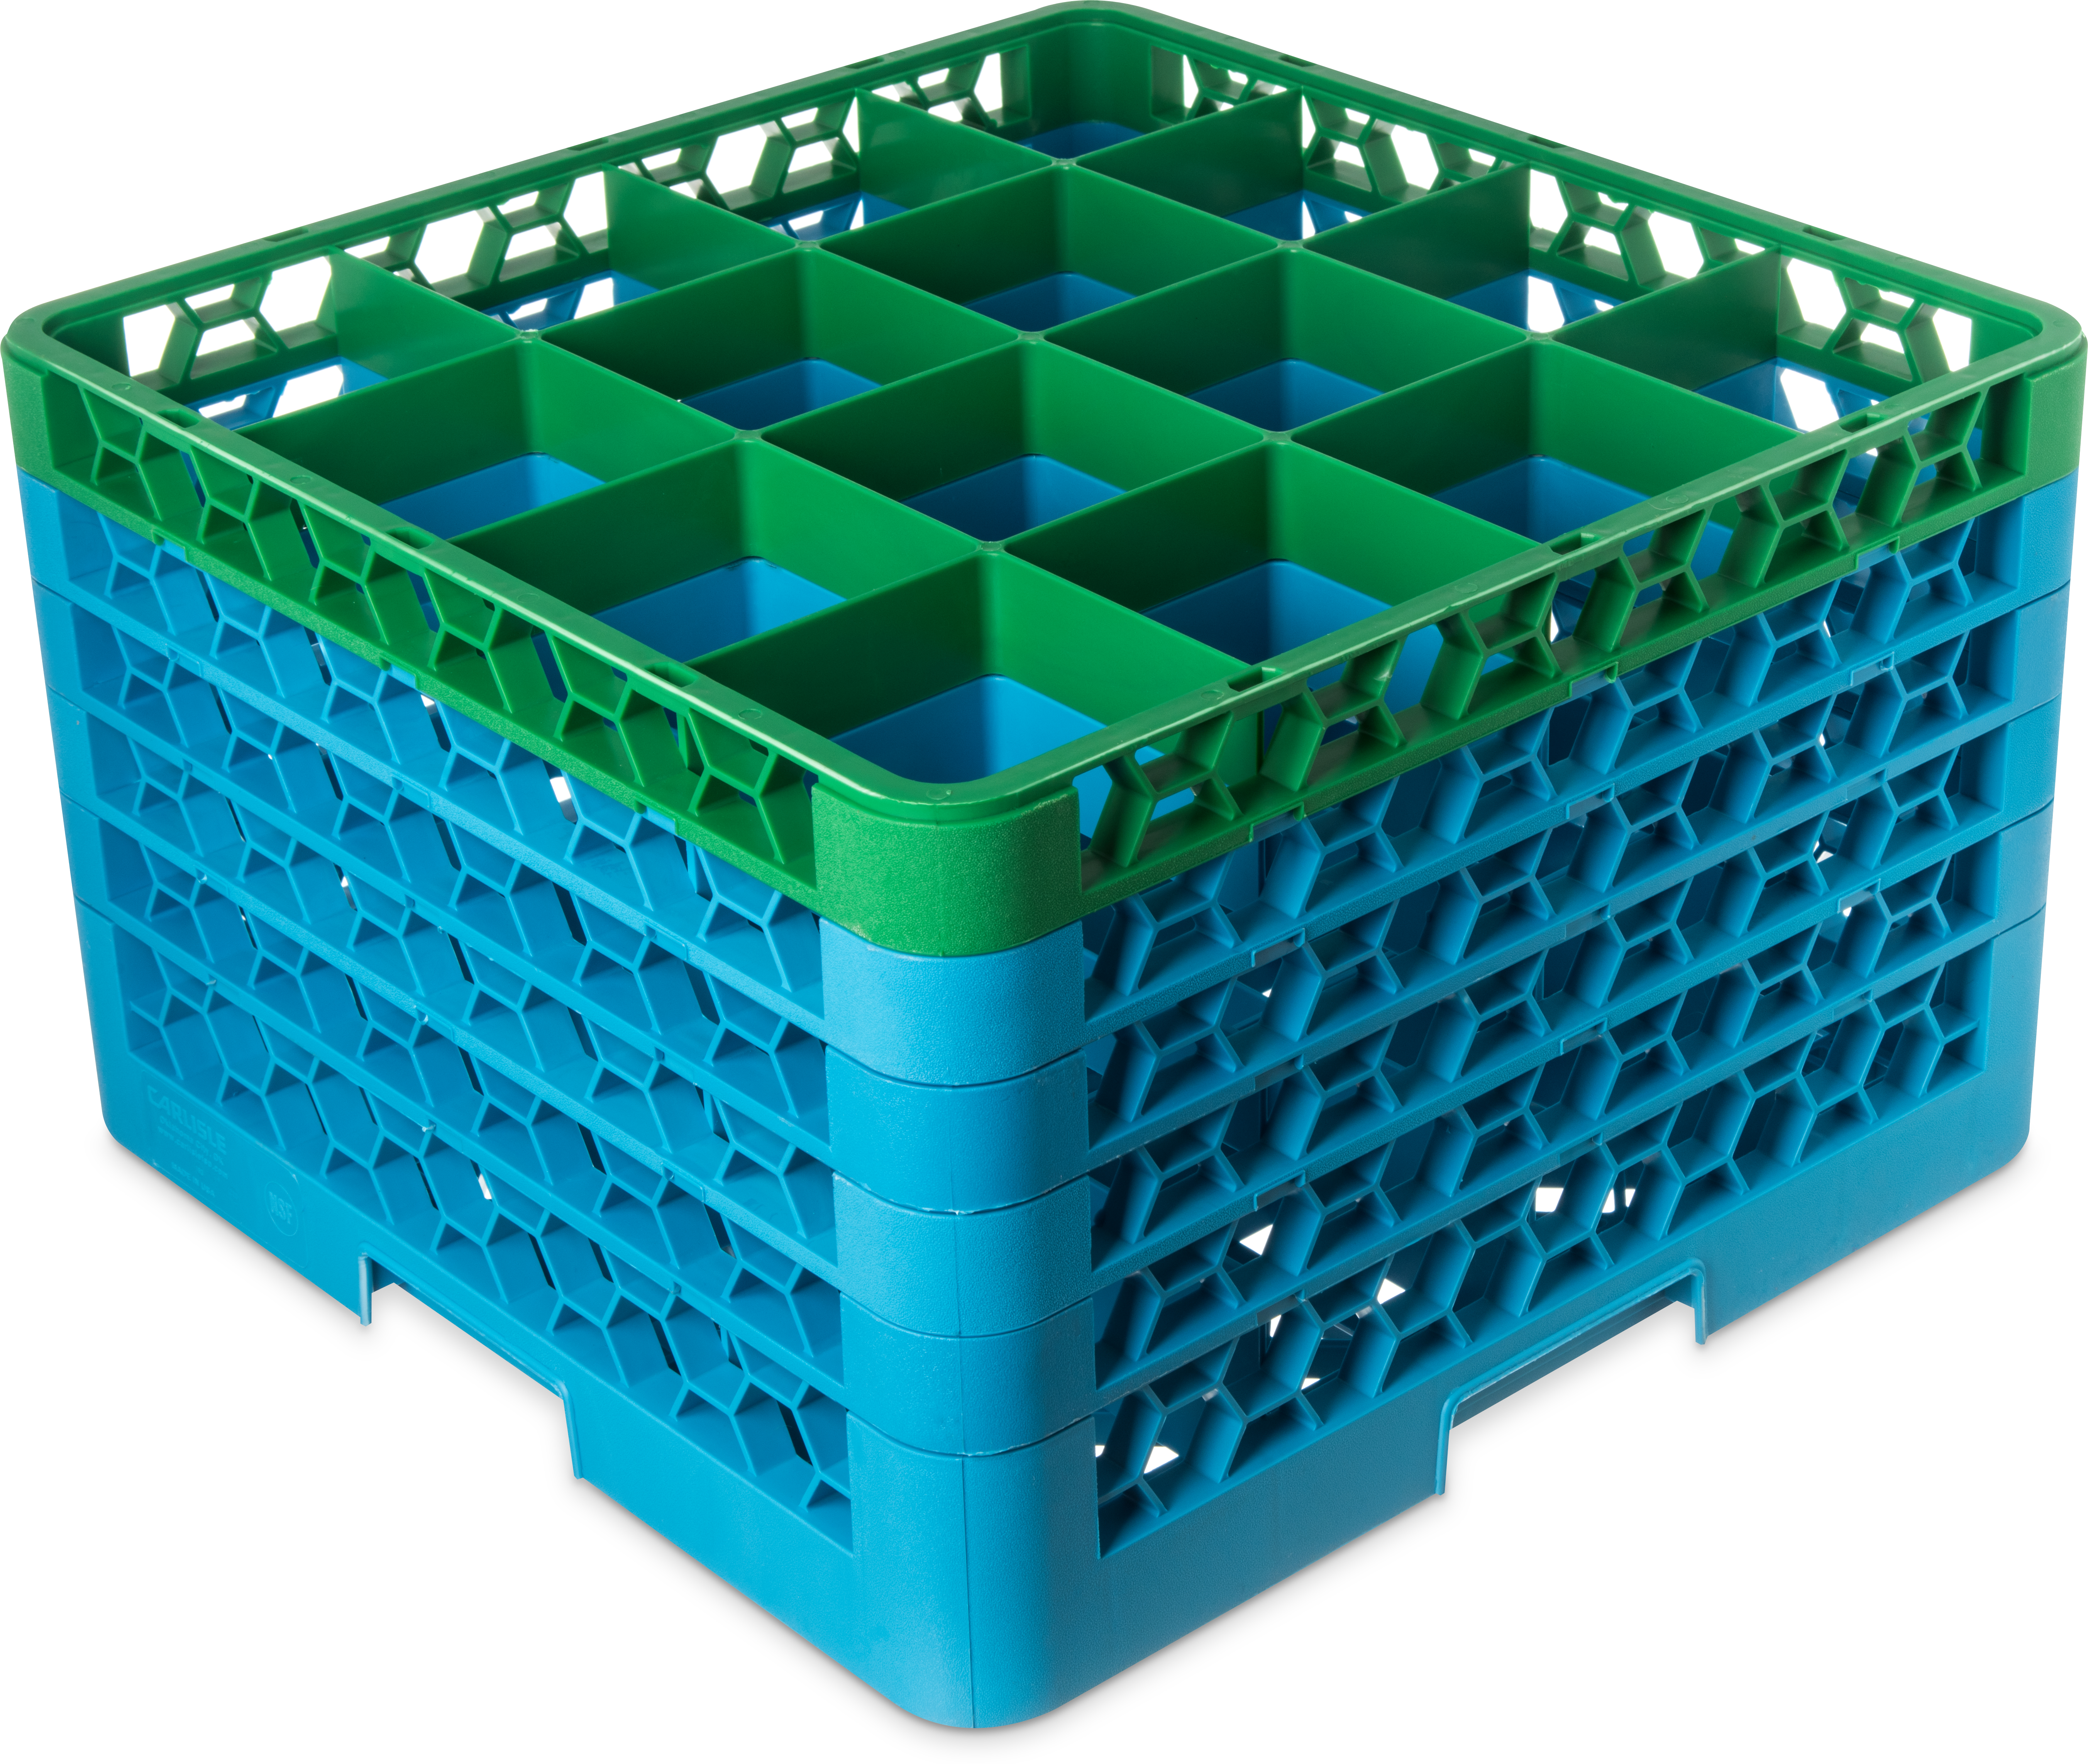 OptiClean 16 Compartment Glass Rack with 5 Extenders 11.9 - Green-Carlisle Blue